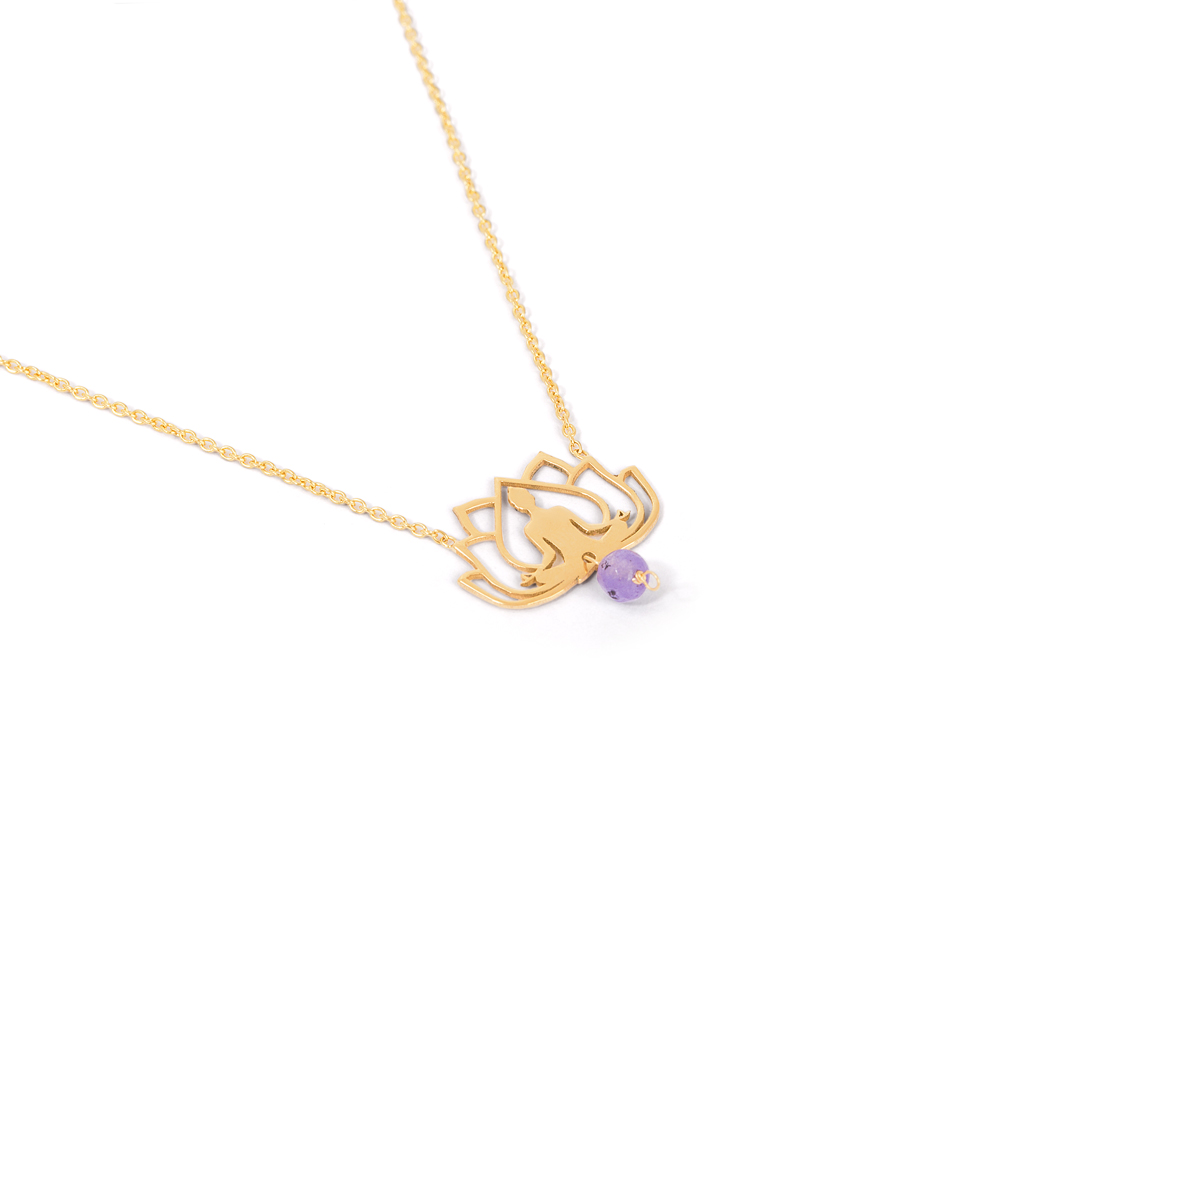 Yoga gold necklace g